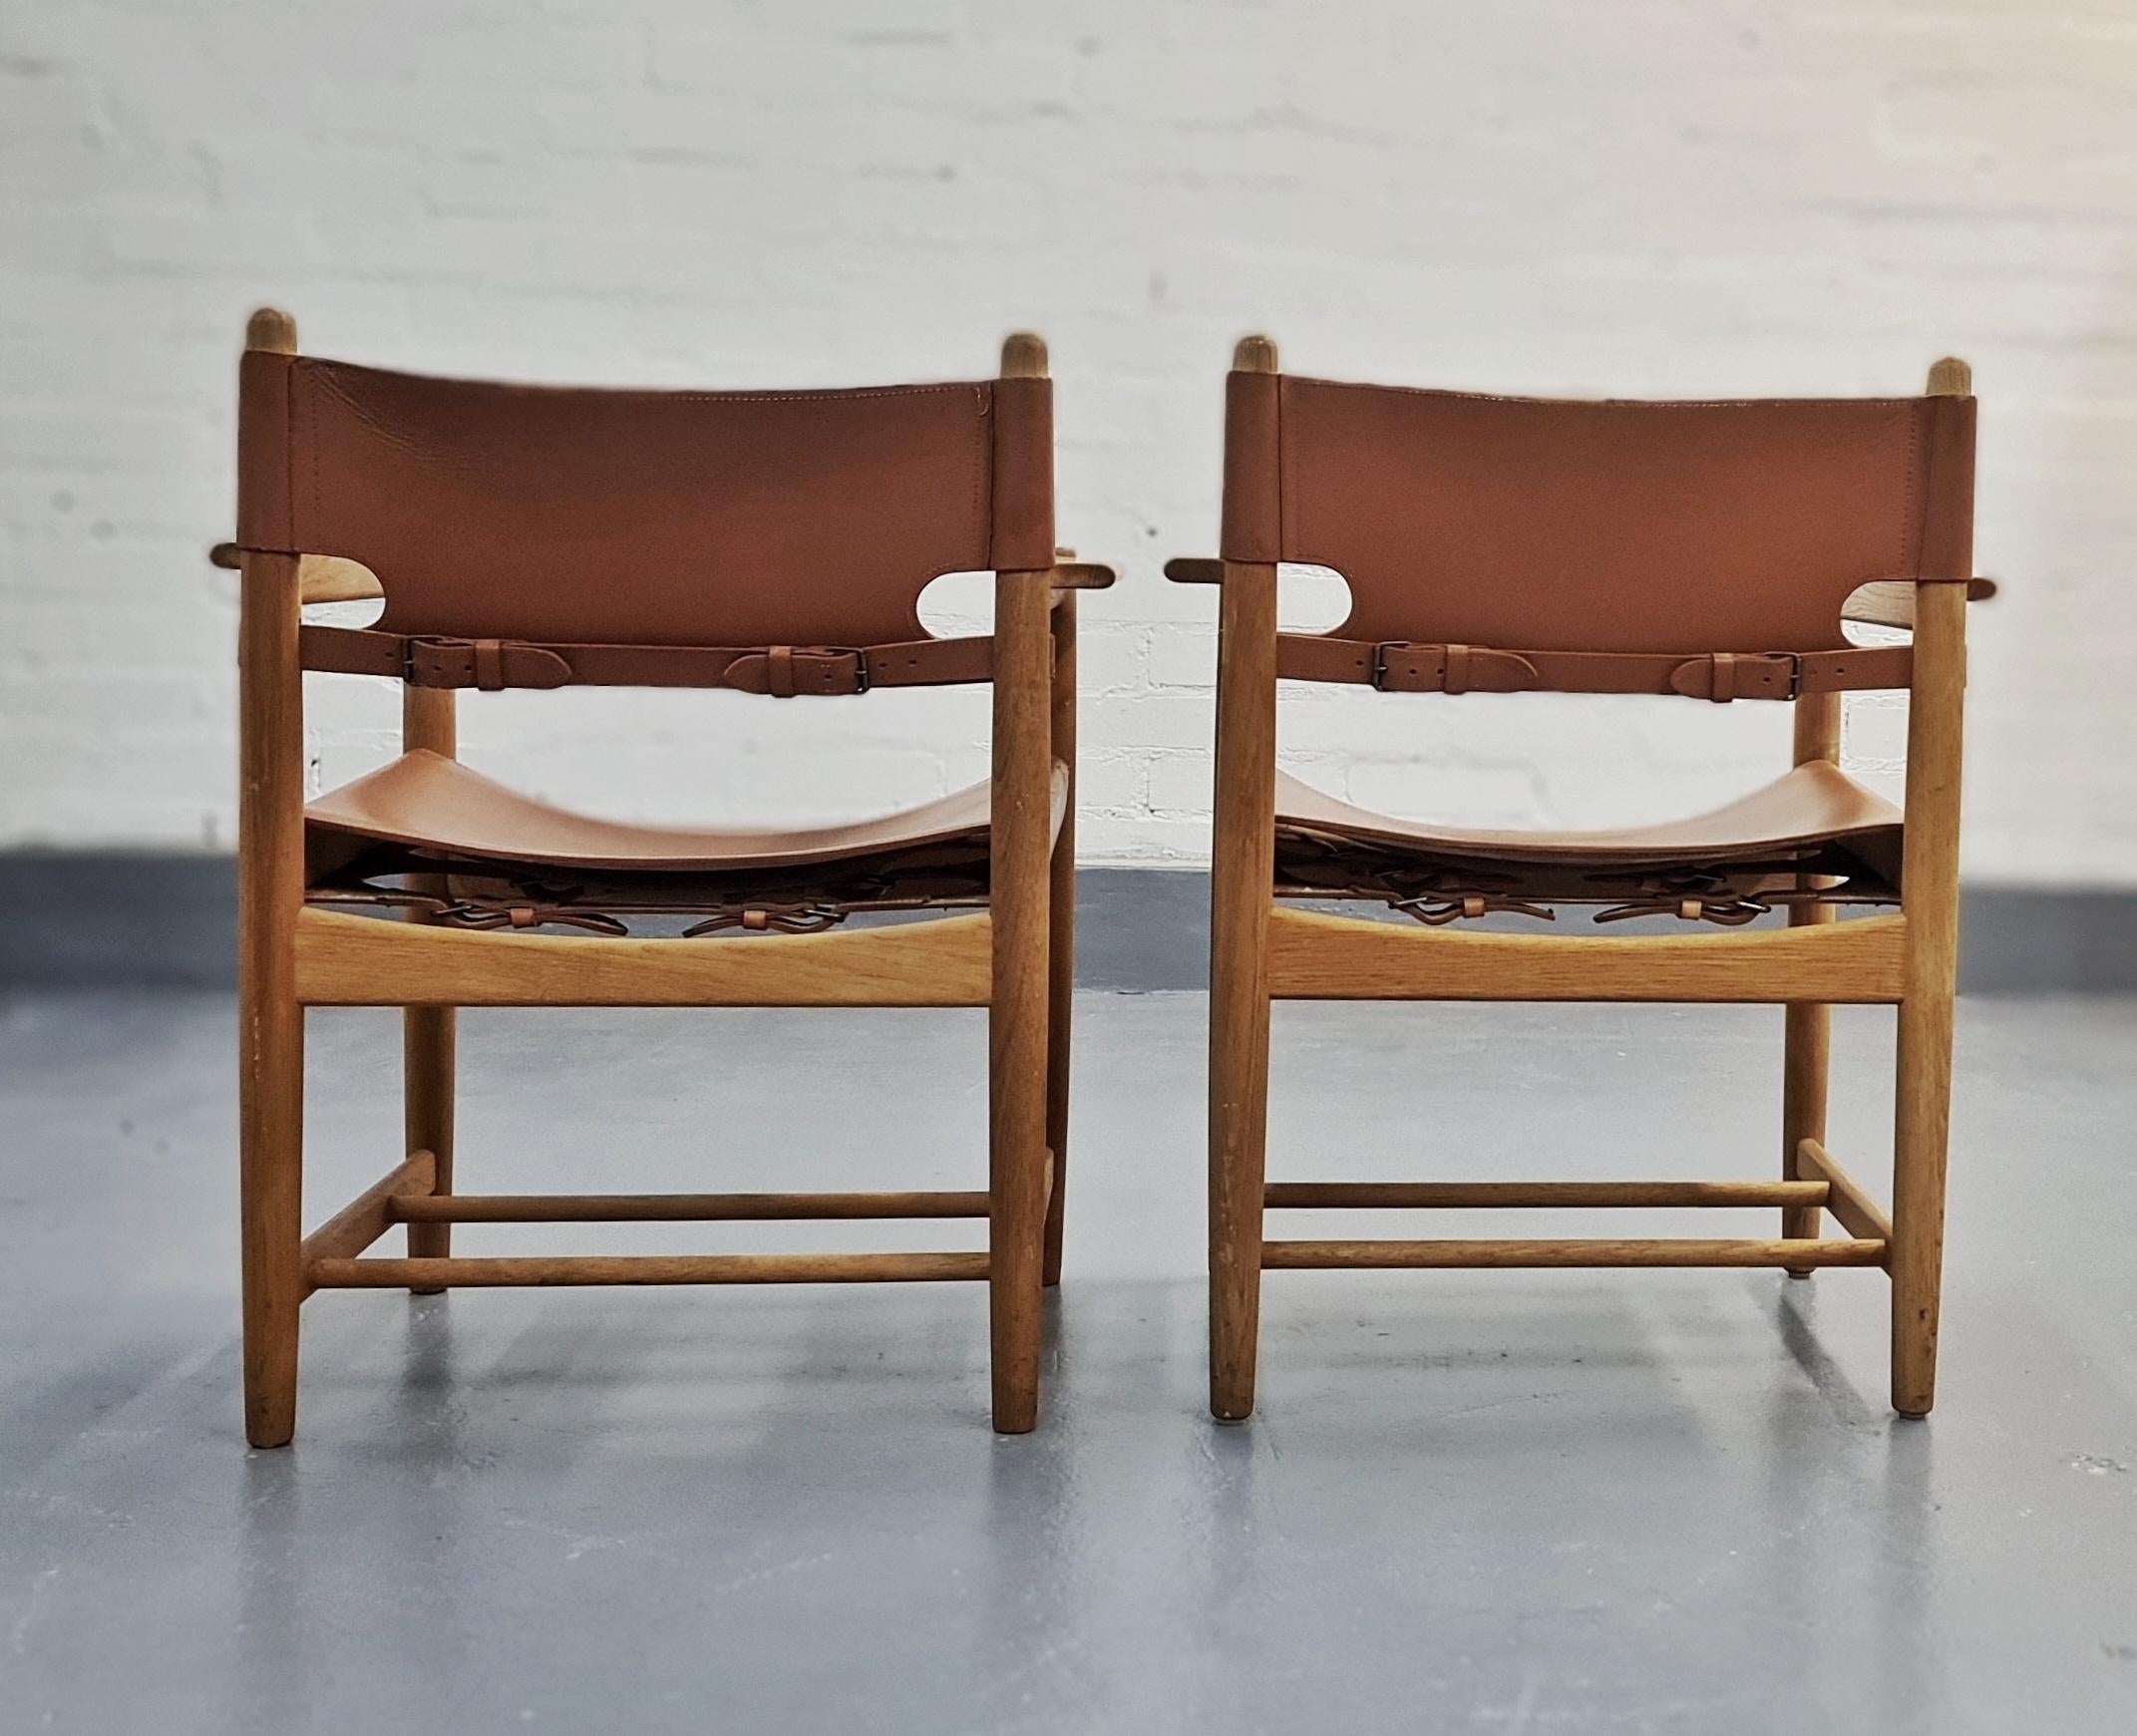 Borge Mogensen Armchair 3238 “Hunting Chair” for Fredericia 1